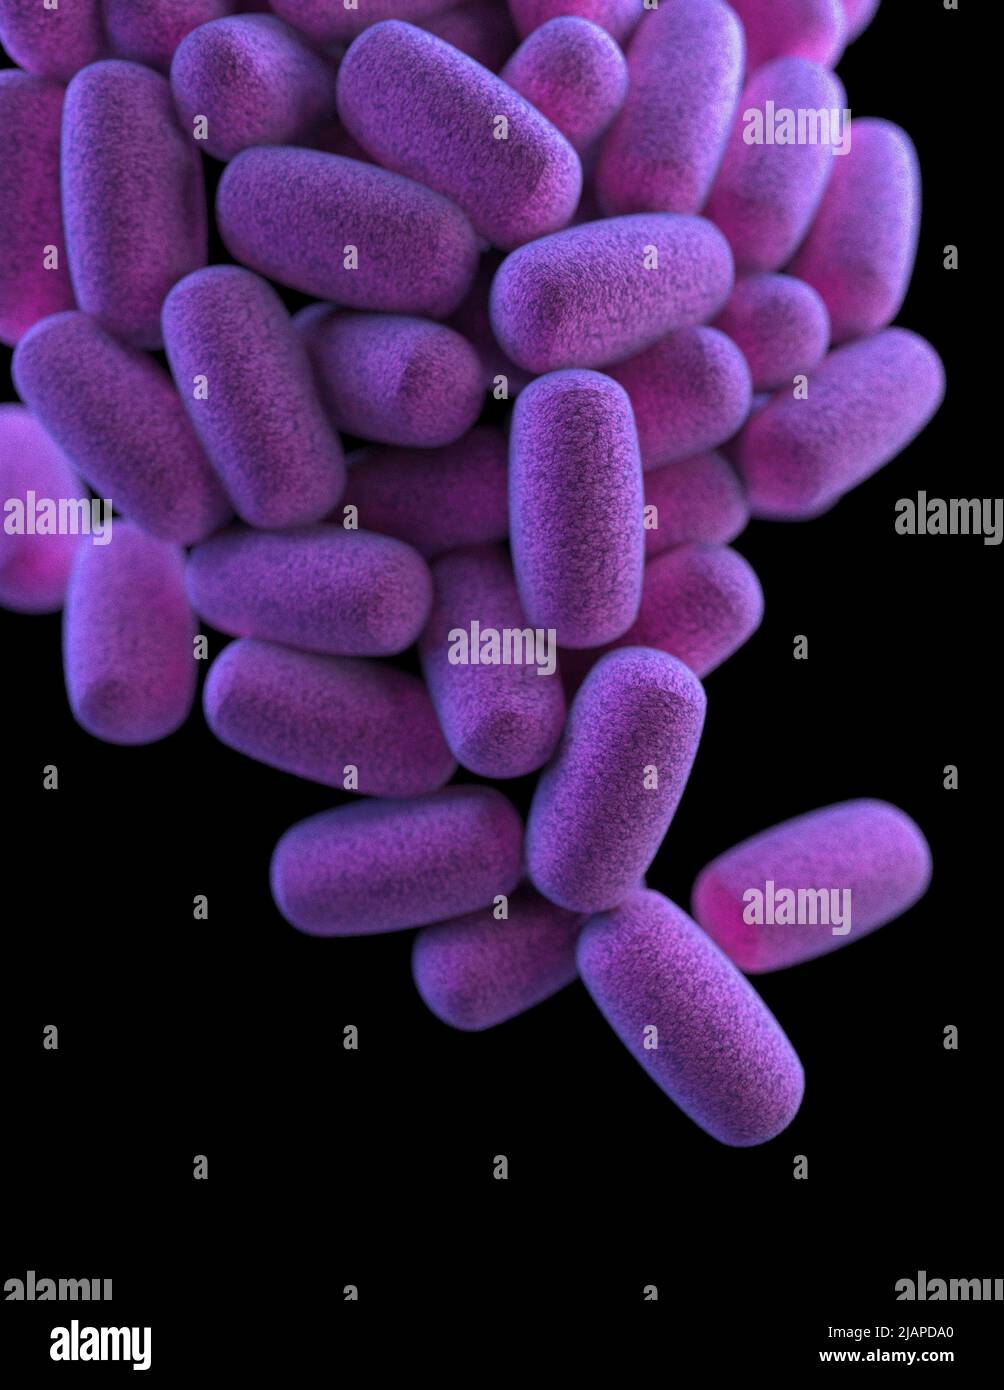 A cluster of barrel-shaped, Clostridium perfringens bacteria. False-colour interpreted artistic rendition based on scanning electron microscopic (SEM) imagery. Stock Photo